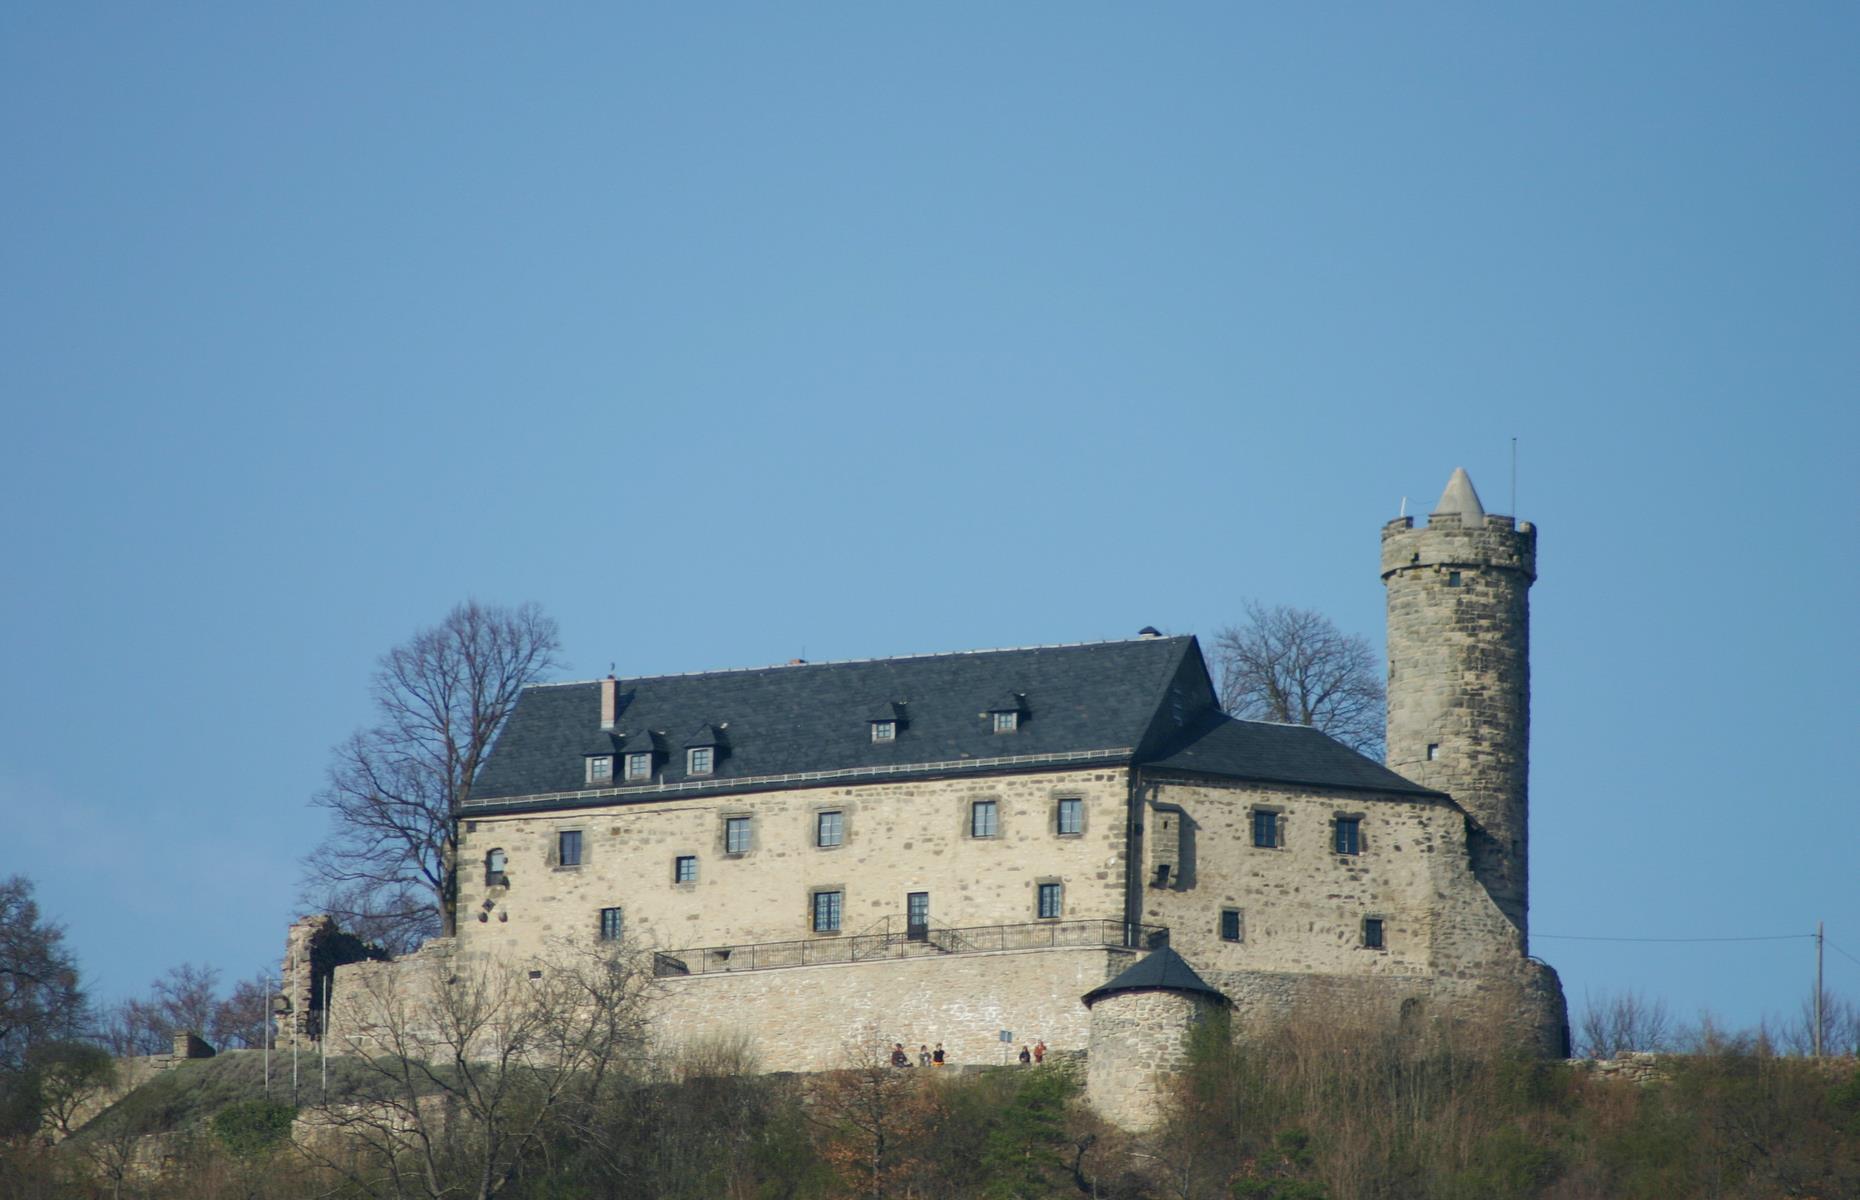 <p>Surrounded by the thick tangle of Thuringia forest, the little spa town of Bad Blankenburg woos visitors with its grand feudal castle Greifenstein, home to the Counts of Schwarzburg-Blankenburg in the 13th and 14th century. The town, also known as Lavender City in reference to a former lavender farm in the area, is famous for being the birthplace of kindergarten. That's right, education pioneer Friedrich Froebel opened the very first kindergarten here in 1840 and now his namesake museum is housed in the very same spot. </p>